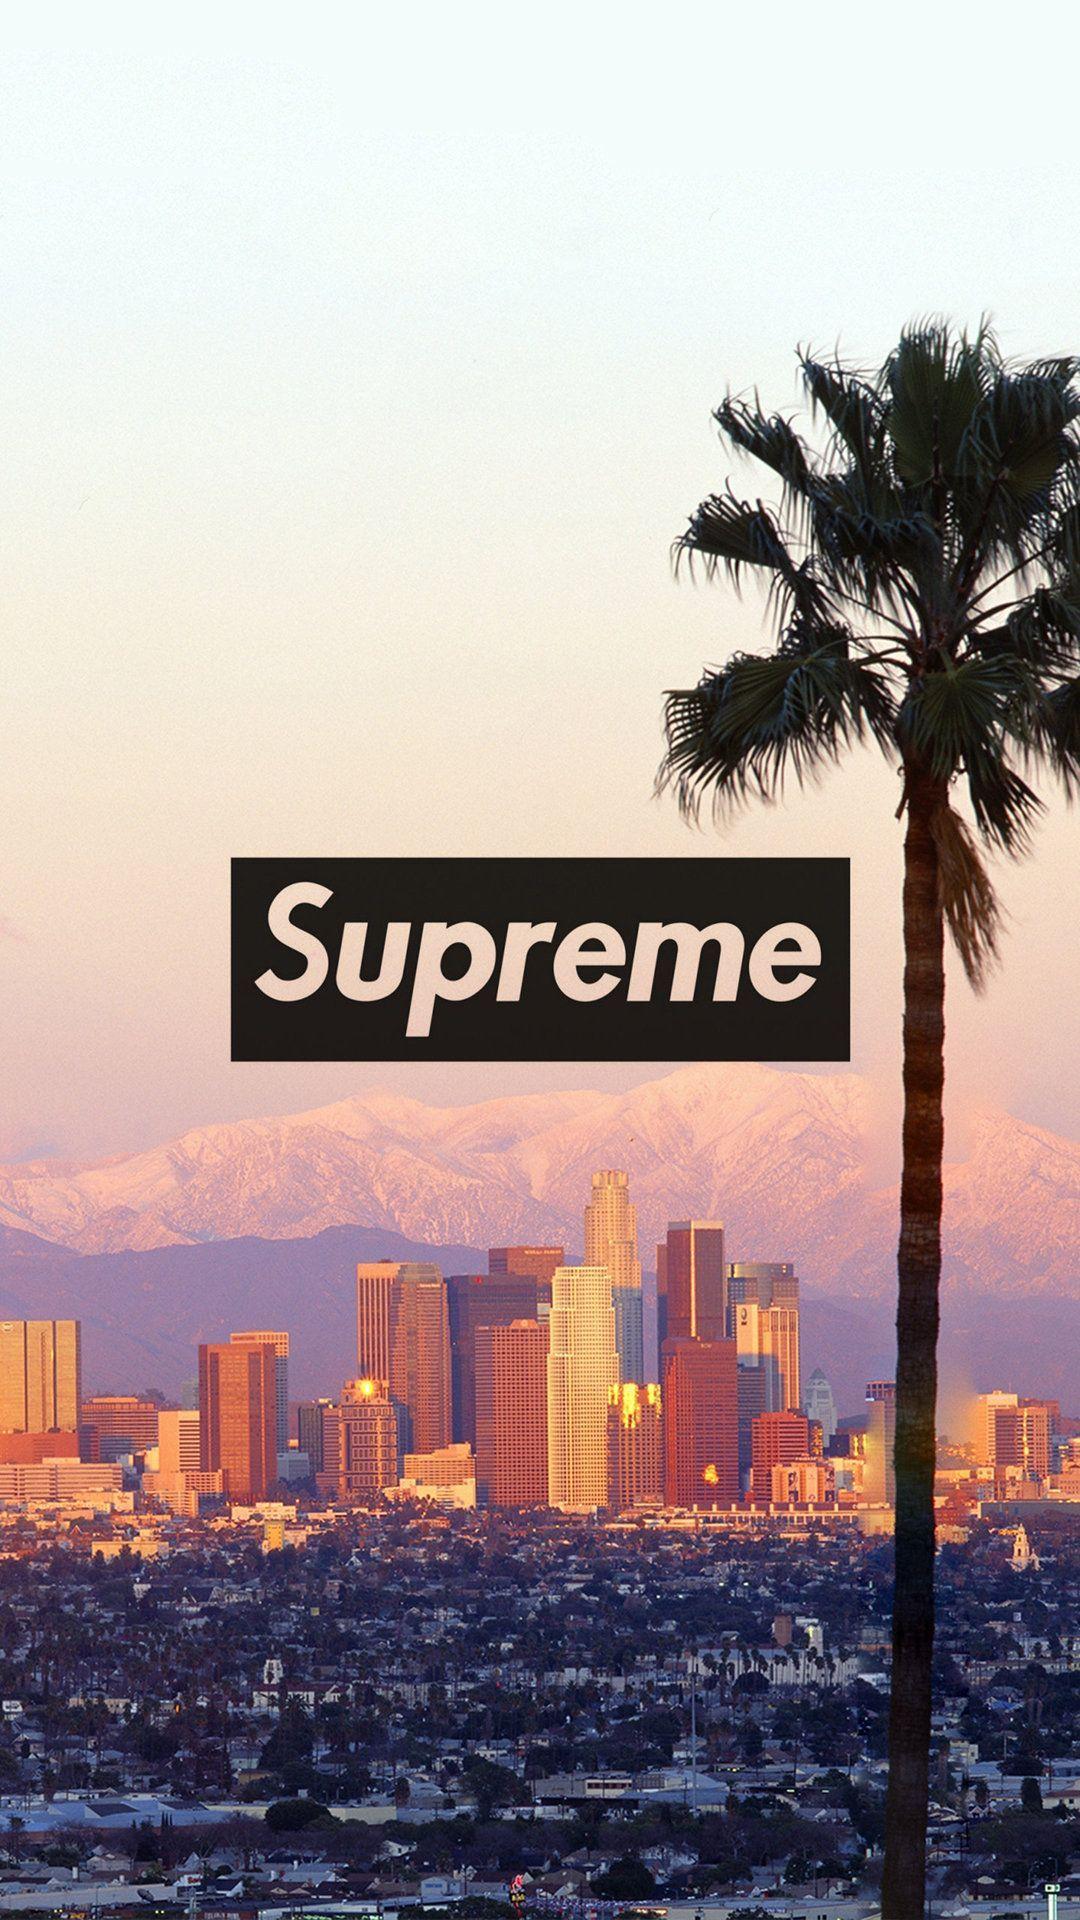 Supreme Los Angeles to see more of the Supreme wallpaper